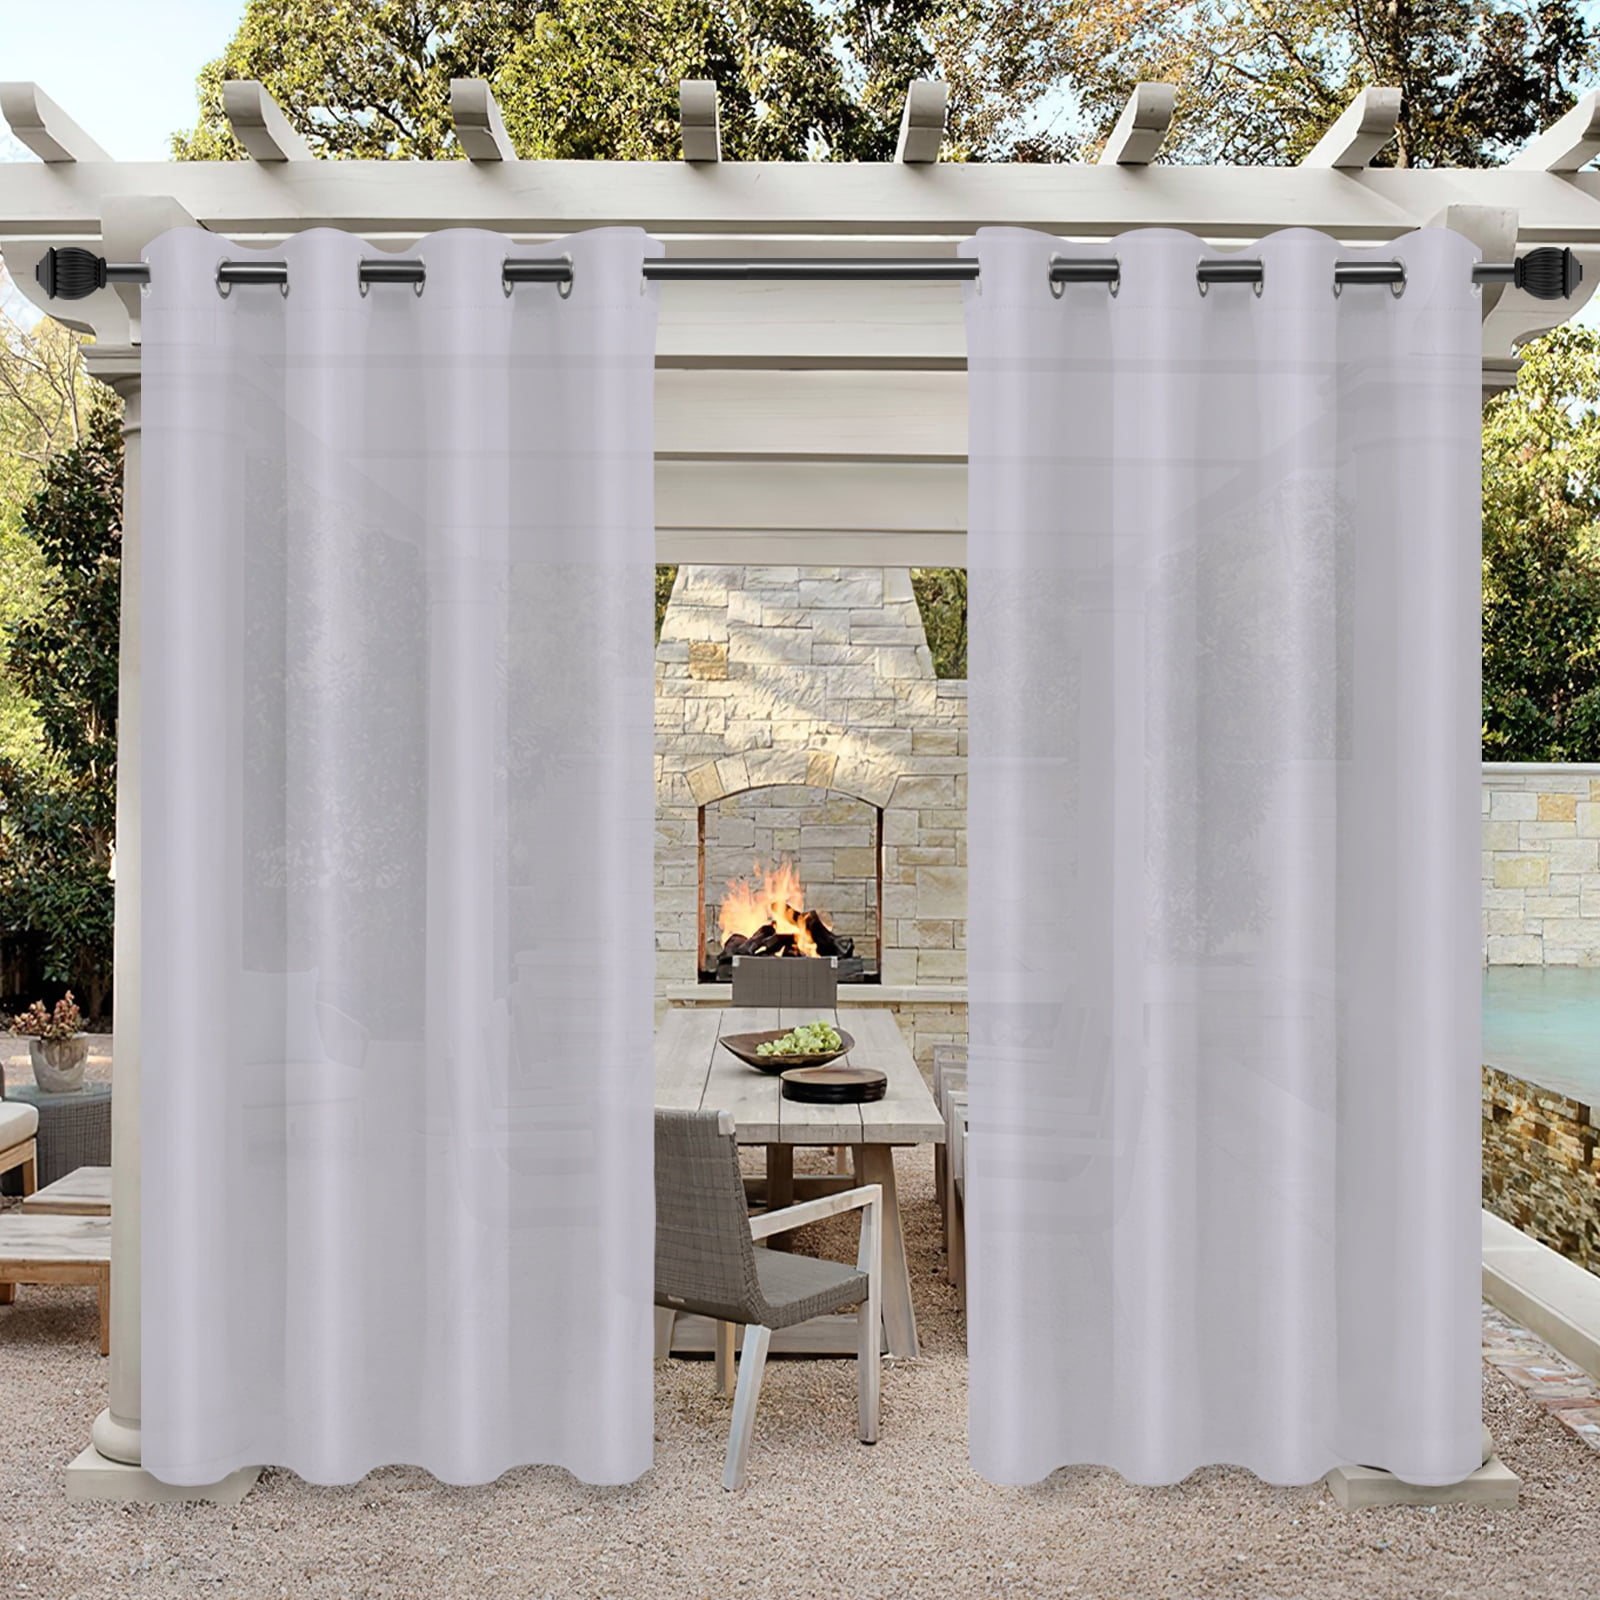 Porch Sun Blocking Blackout Curtains for Bedroom Dark Grey Thermal Insulated Hosonson 2 Panels Waterproof Outdoor Curtains for Patio 52x120 Inch Cabana Drapes for Living Room Pergola 